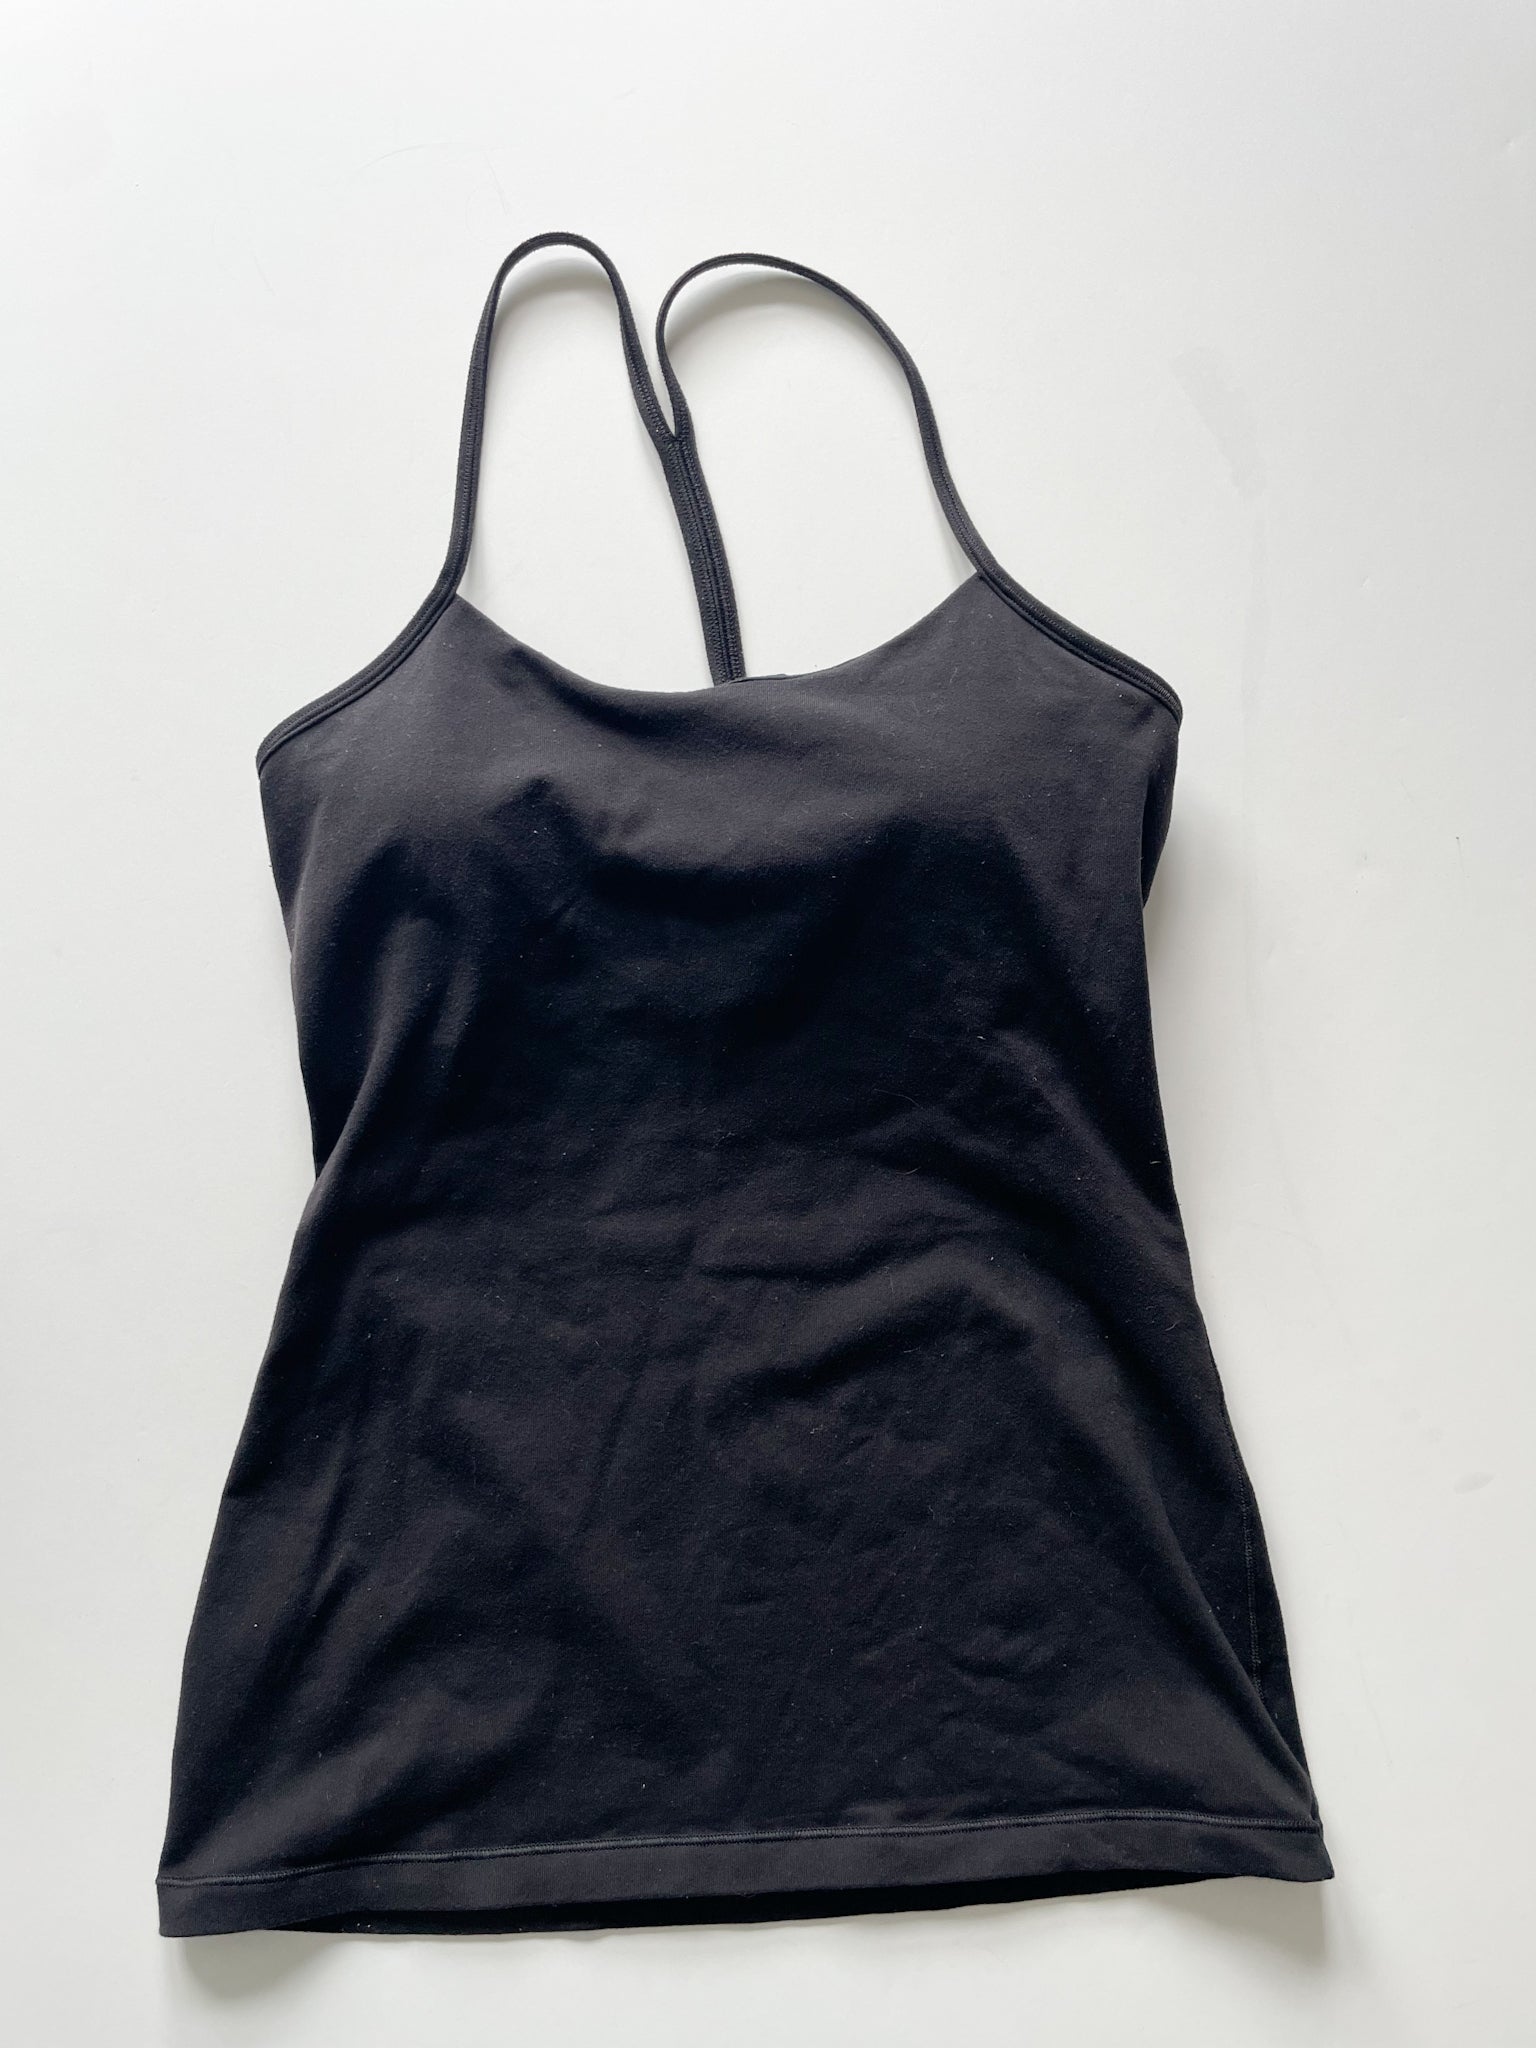 Lululemon Women's Mesh Workout Yoga Tank Top with Open Back Size